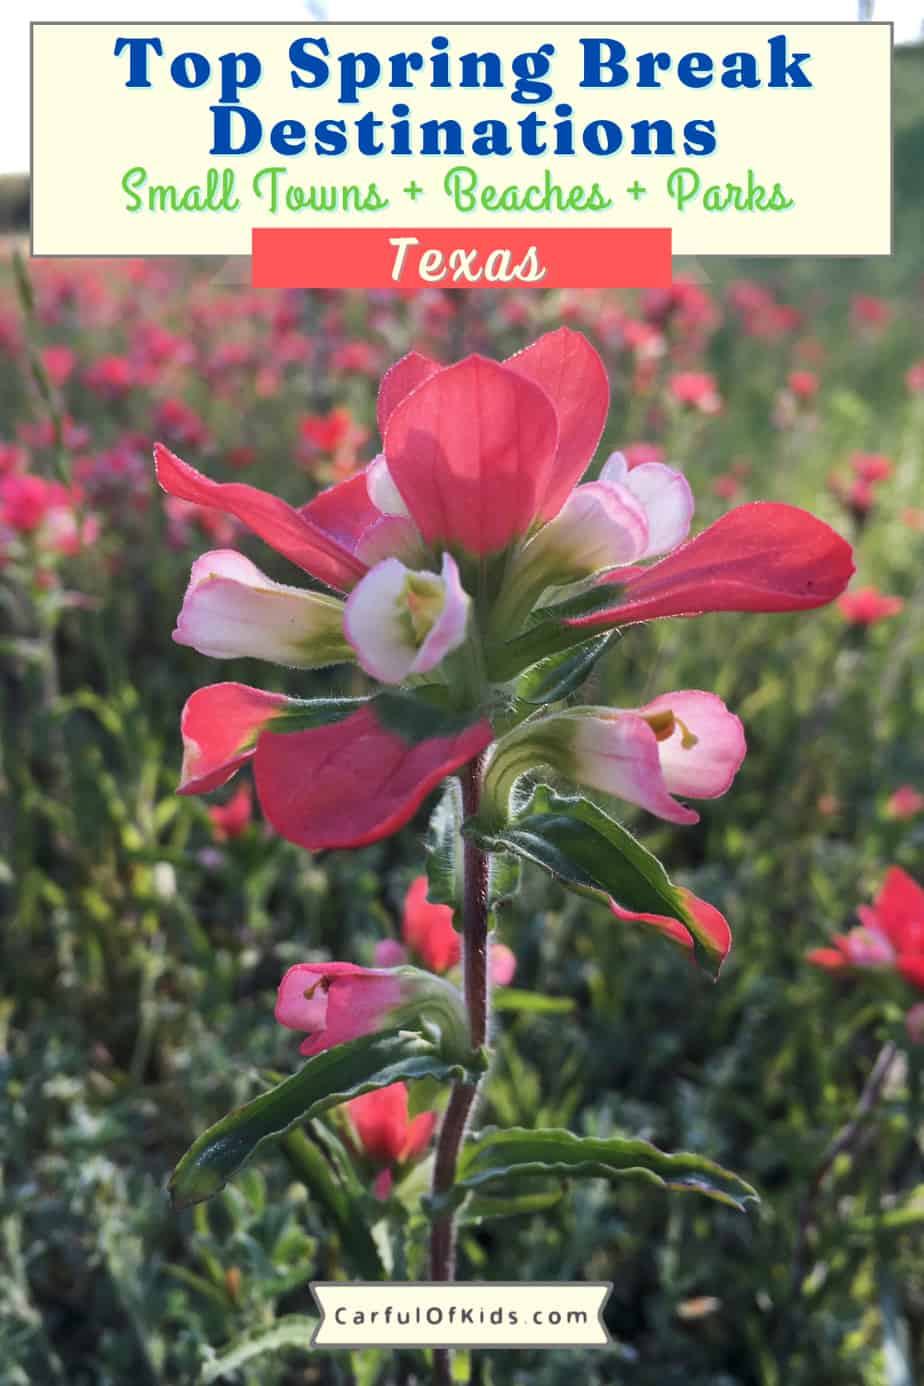 Make it a Spring Break to remember with your kids. Here's a list of the top places to visit in Texas for Spring Break with kids. Find destinations for across the state. Get tips on best beaches in Texas, top small town destinations in Texas, best places to camp and more. What to do in Texas for Spring Texas #SpringBreak #Texas